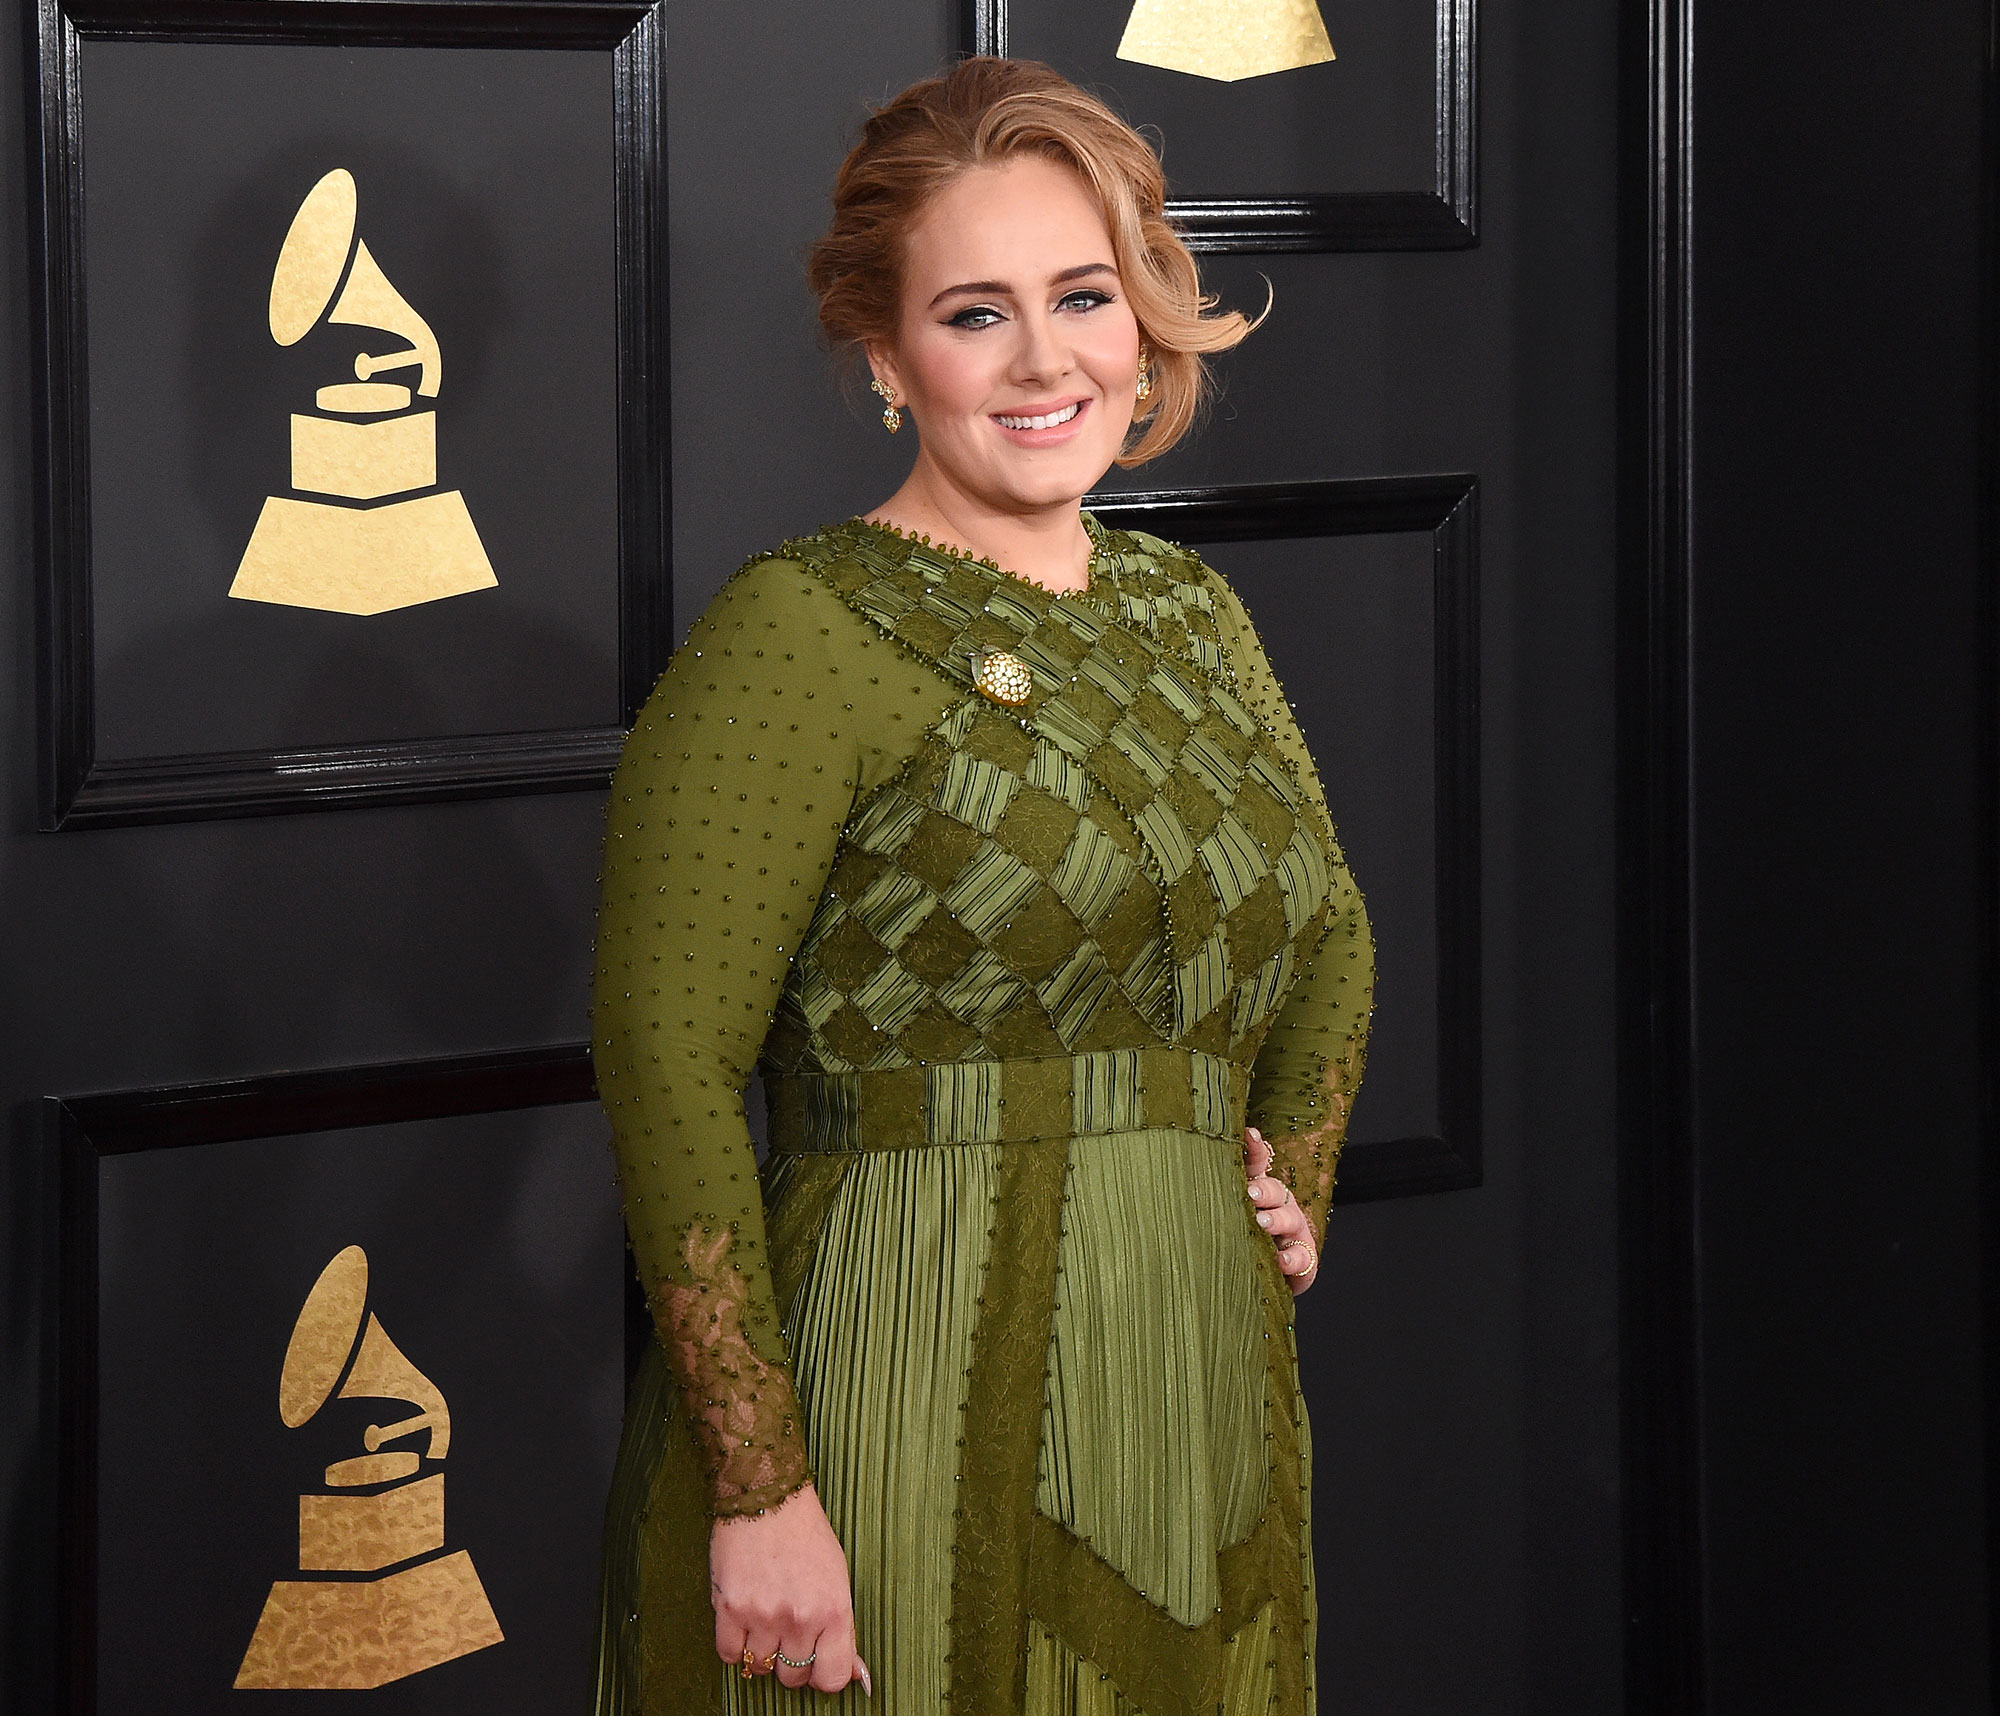 Adele expresses her disappointment by the women’s comments about her weight loss